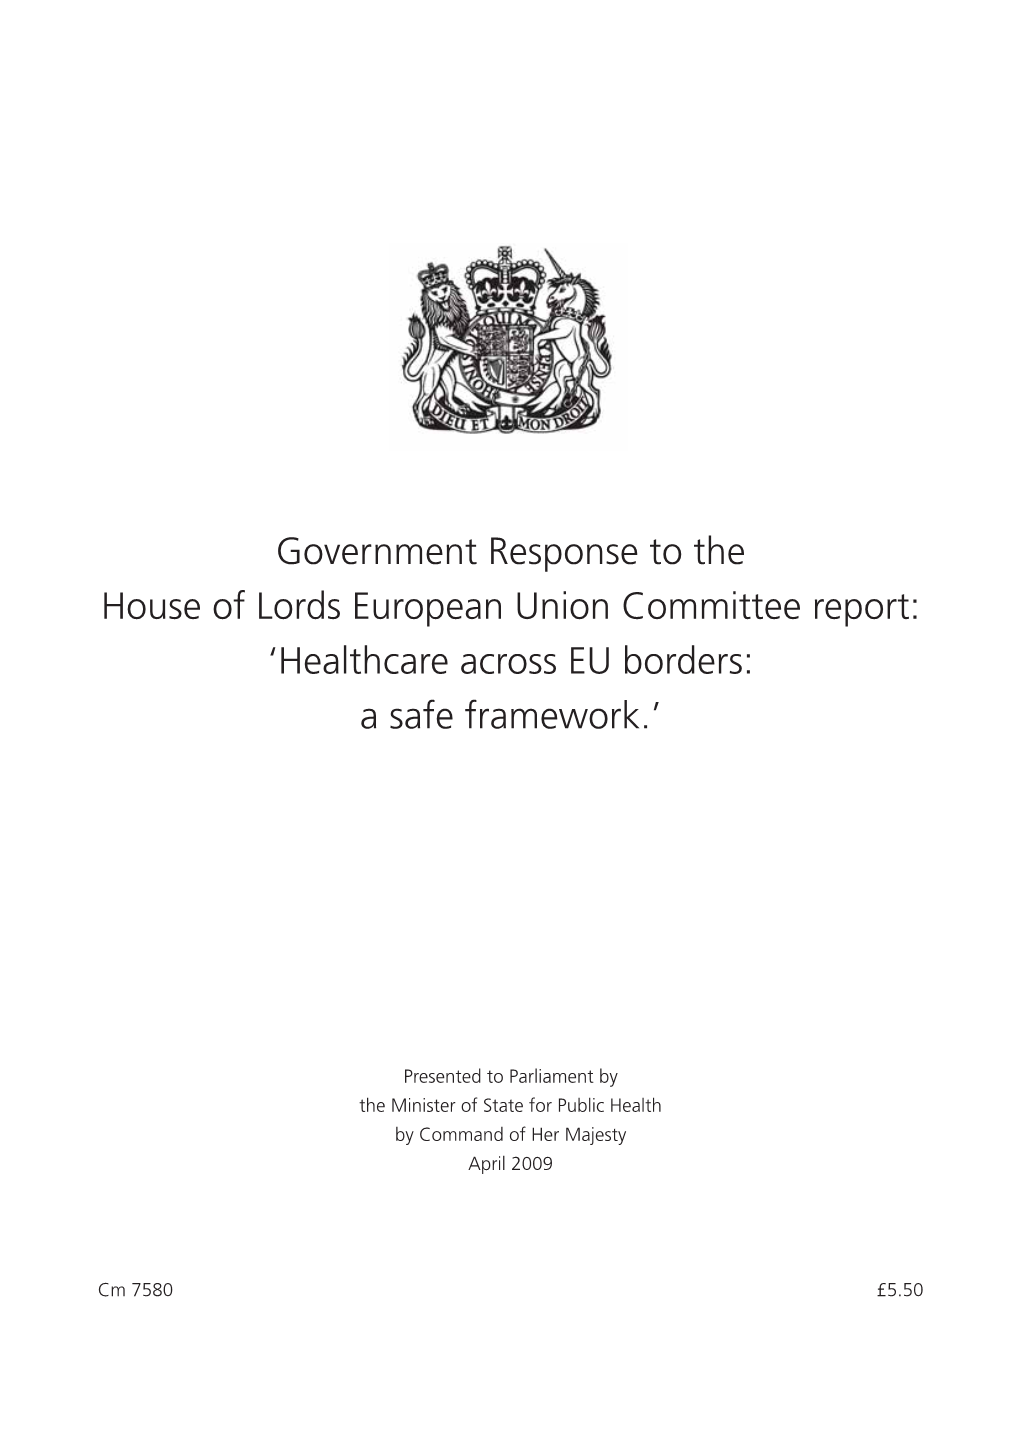 Government Response to the House of Lords European Union Committee Report: ‘Healthcare Across EU Borders: a Safe Framework.’